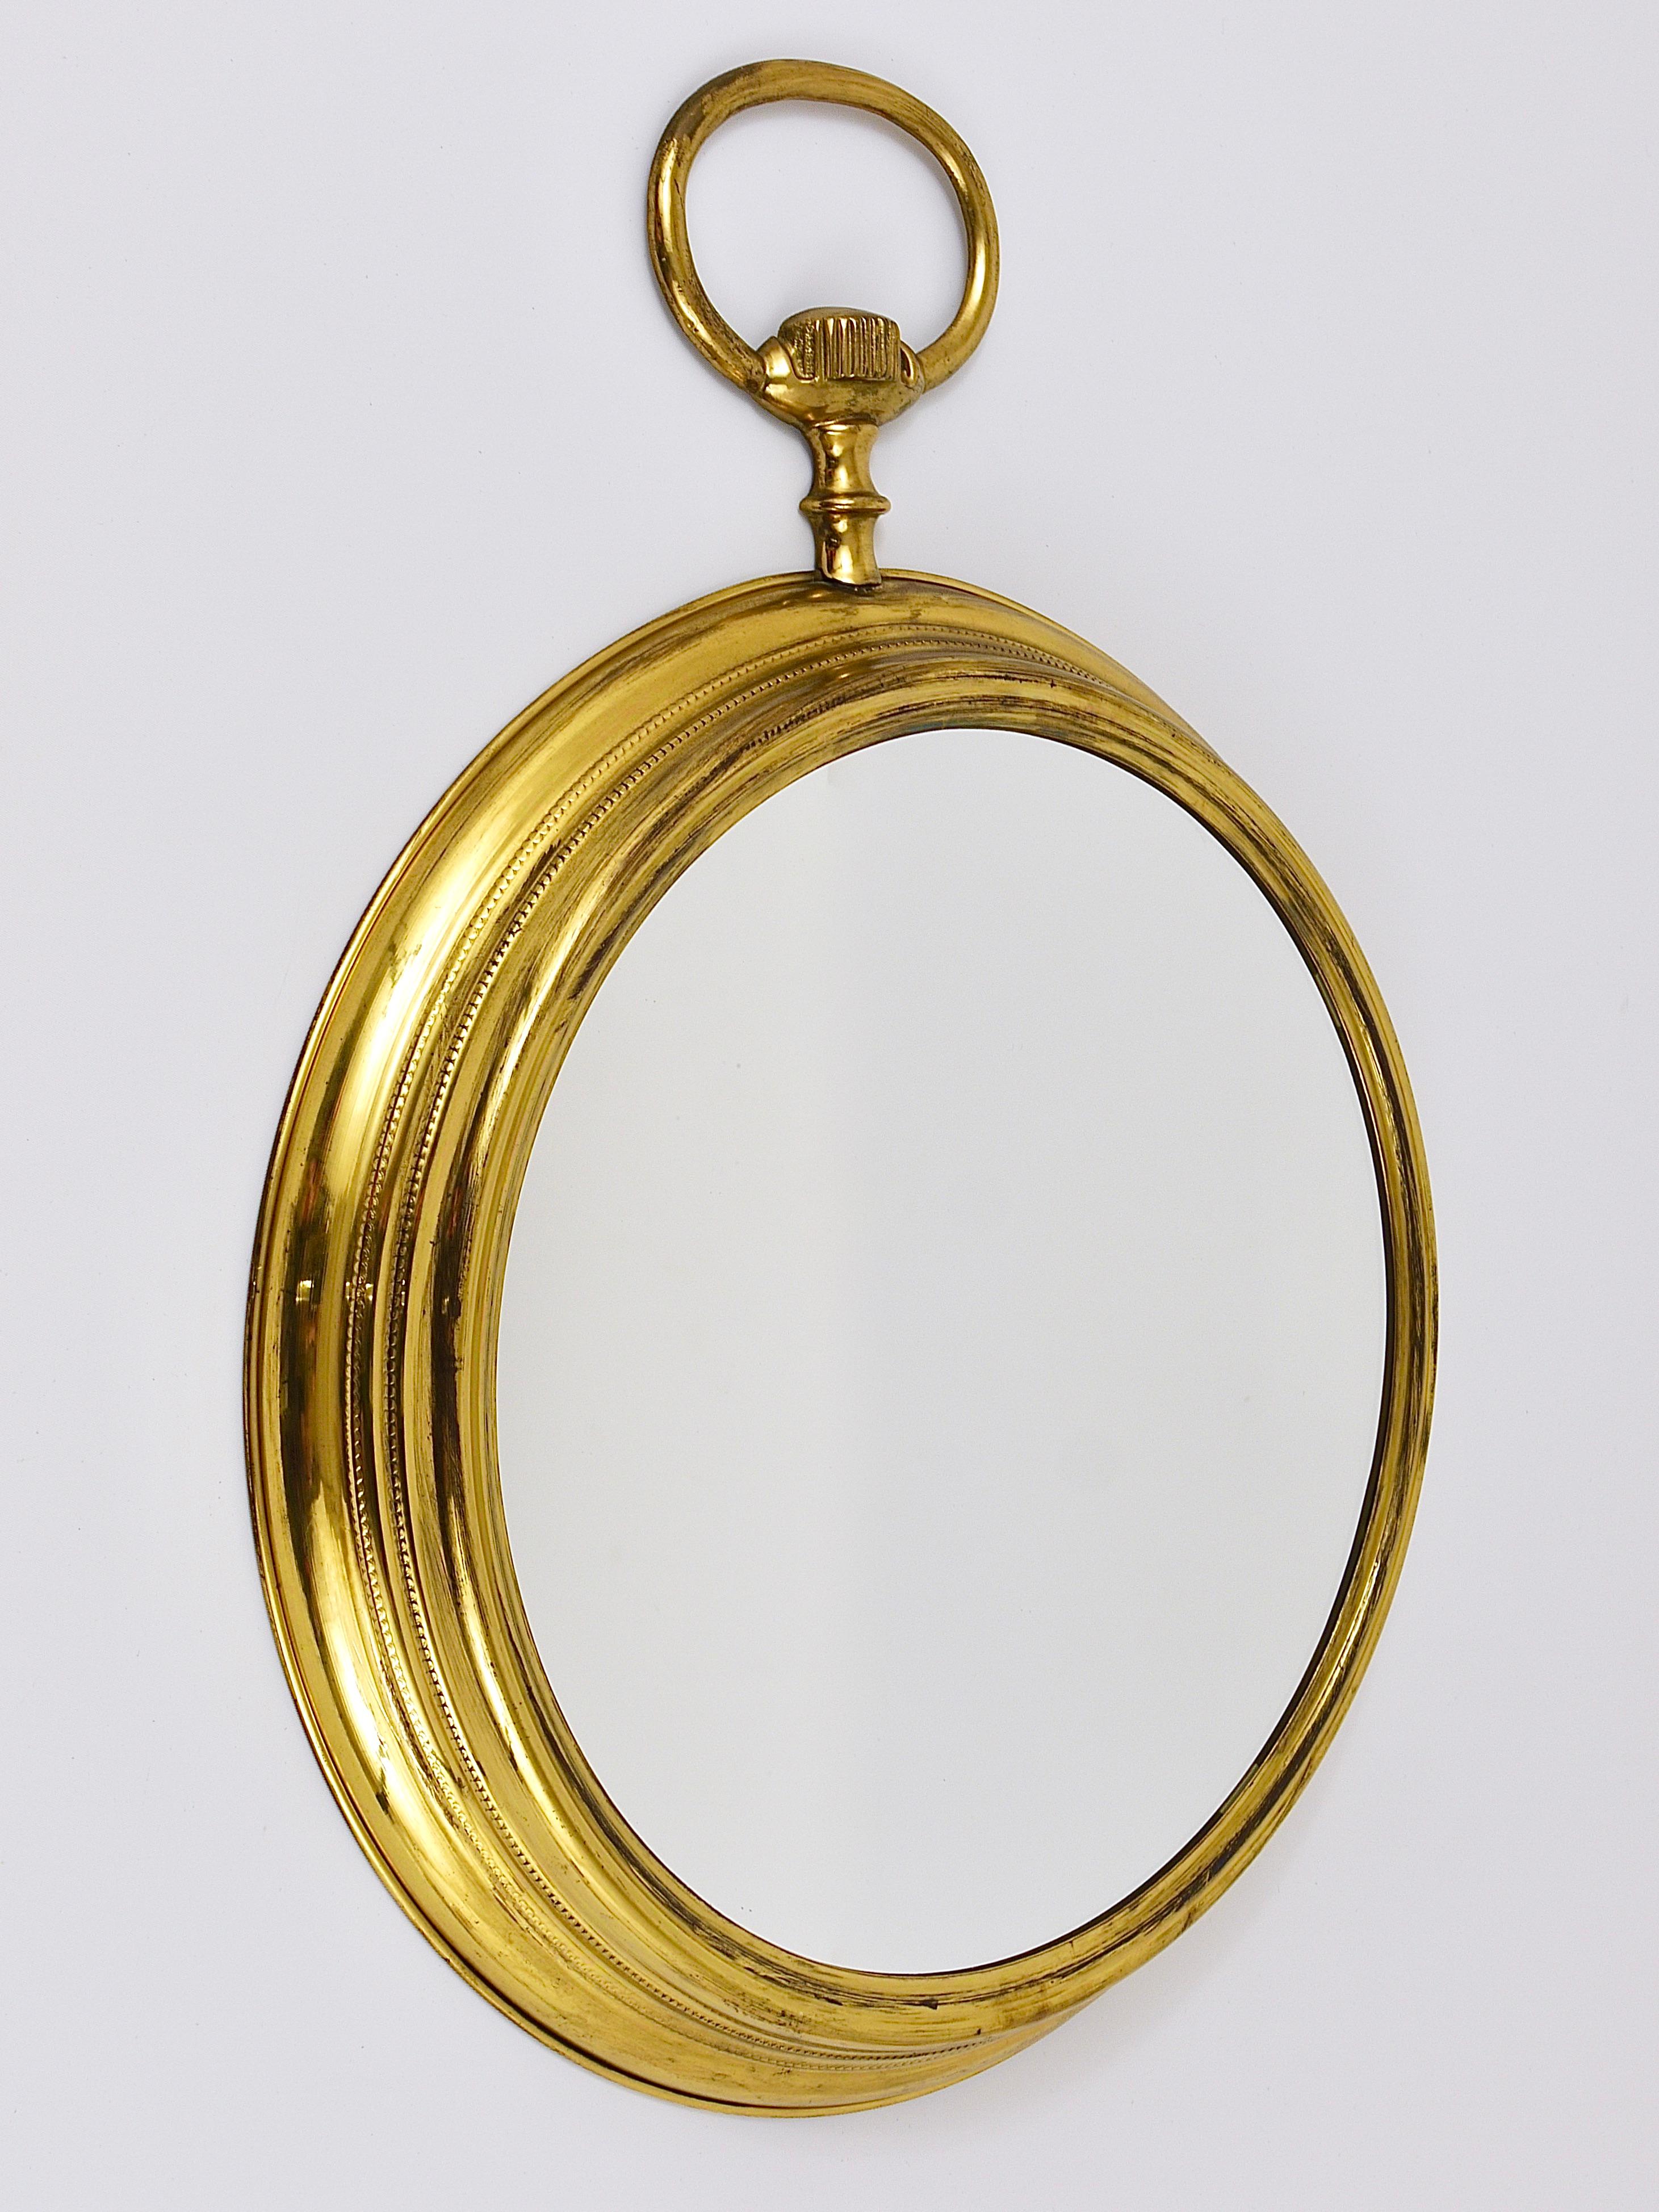 A huge 23 inches high round midcentury brass wall mirror in the shape of a pocket watch. Made in Italy in the 1950s. In the style of Piero Fornasetti. In very good original condition, with the original mirror glass and nice patina on the brass.